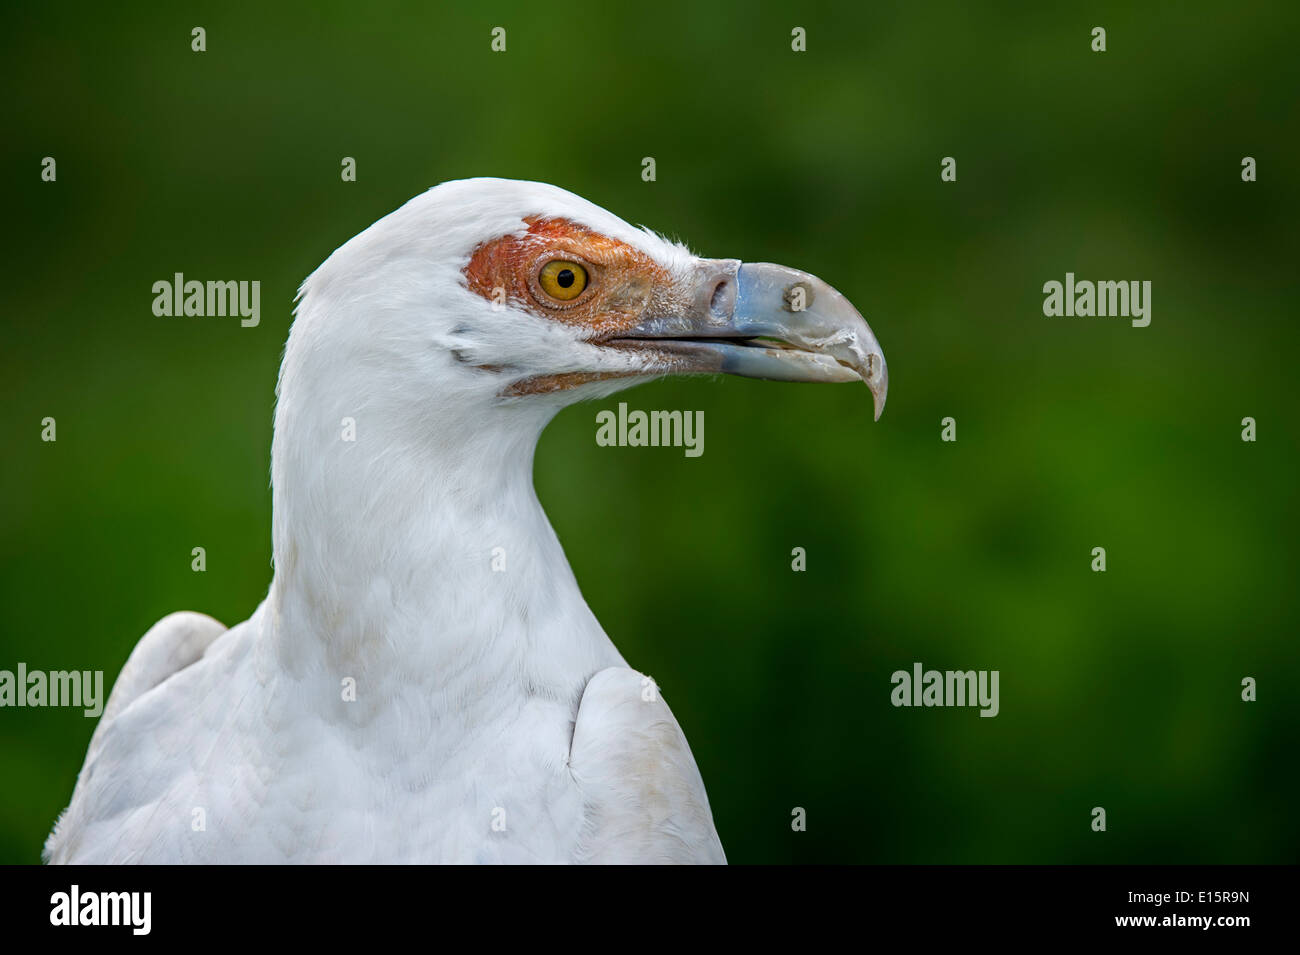 Palm-nut vulture / palm nut vulture (Gypohierax angolensis) native to sub-Saharan Africa, close up of head Stock Photo